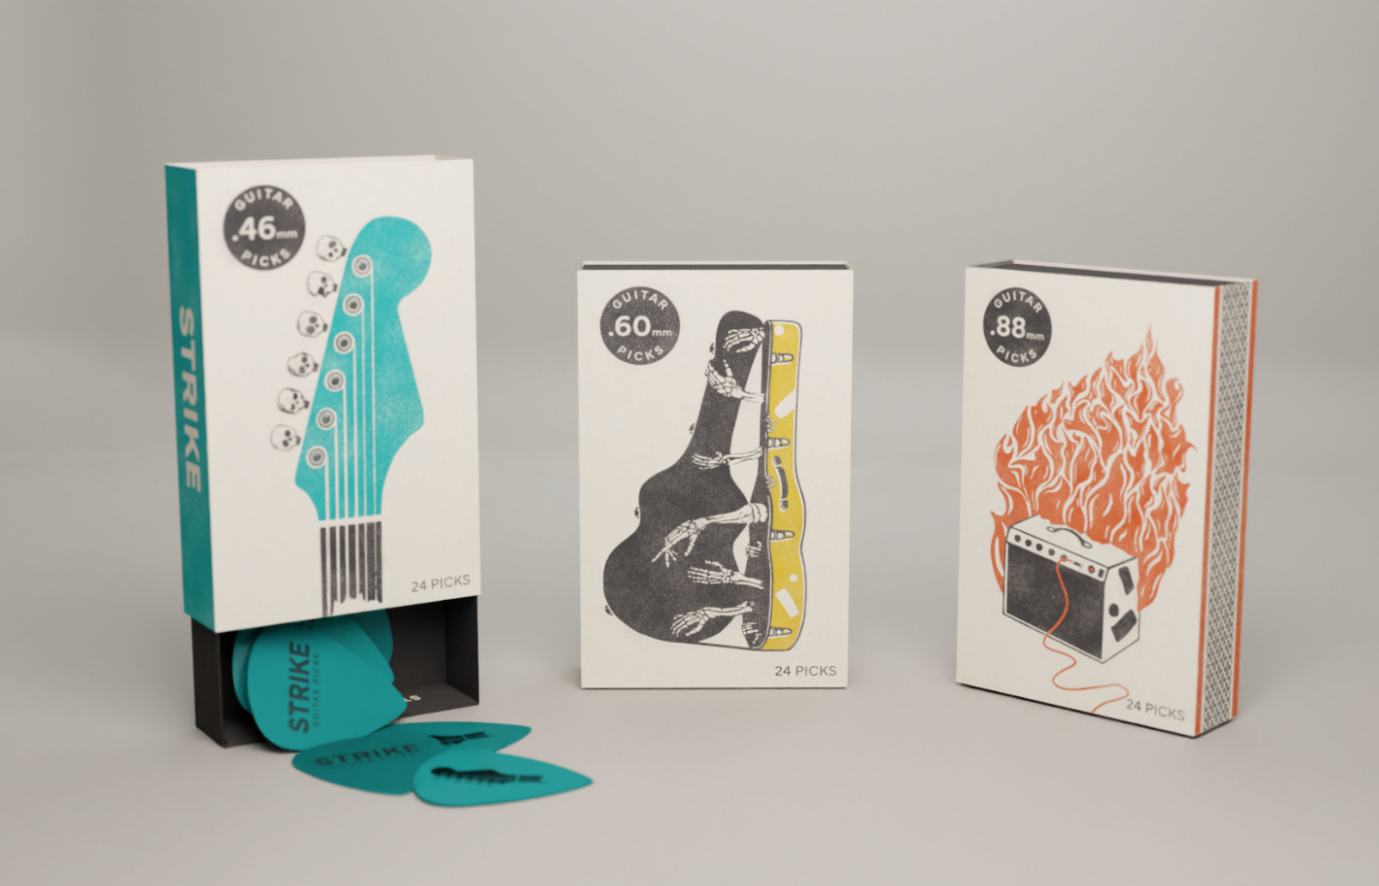 Image of guitar accessory packaging designed by Dean Turnball